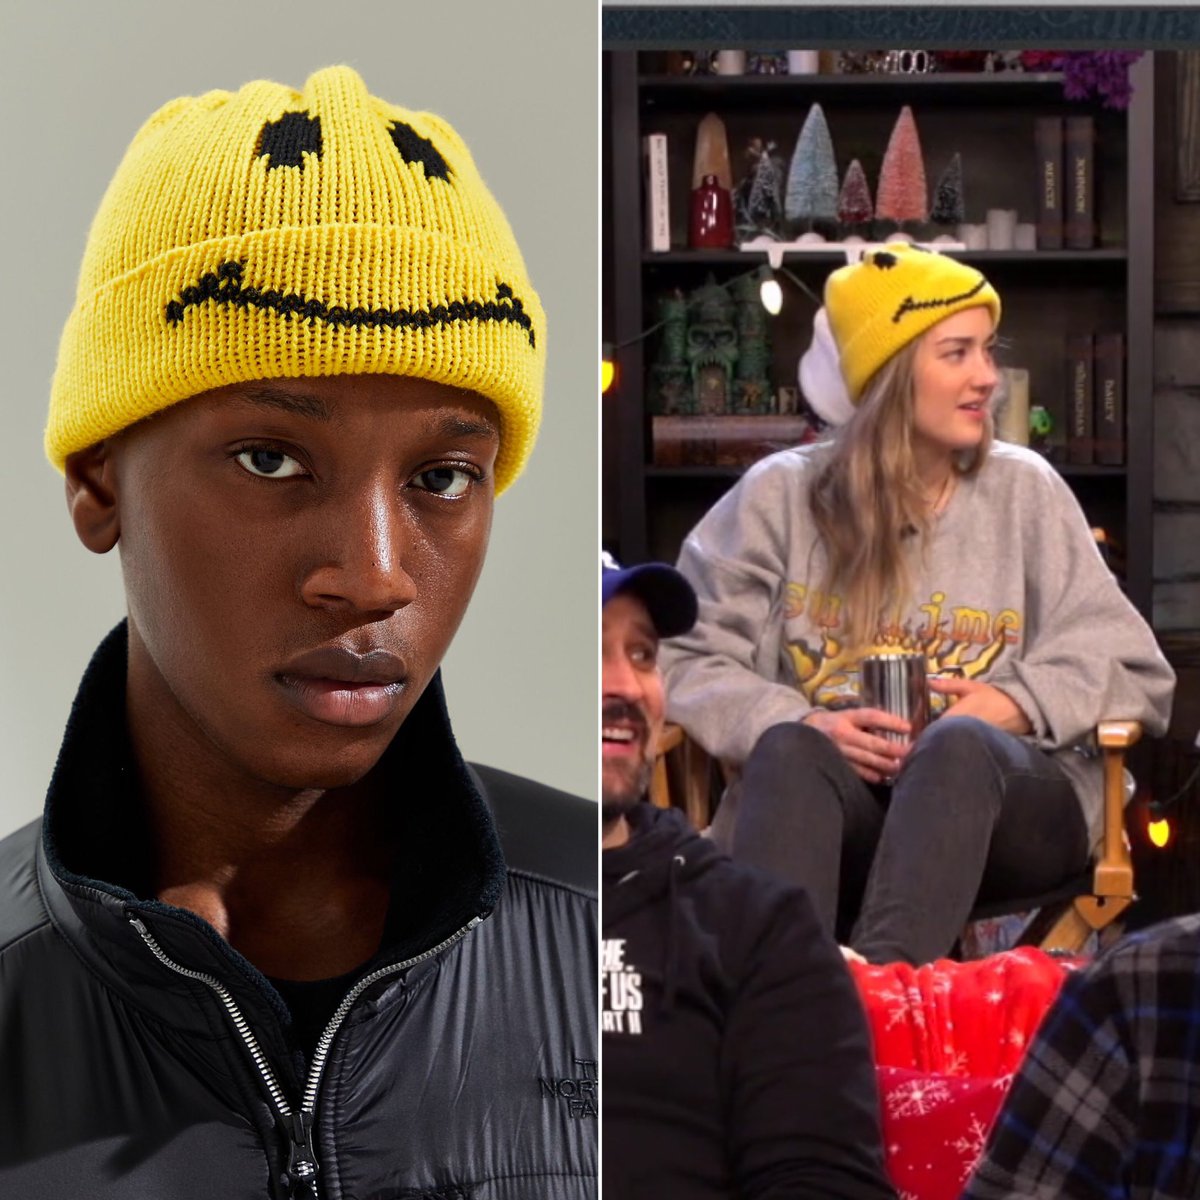 forælder Bytte Bedstefar critrolecloset on Twitter: "she also wore the “chinatown market x smiley  beanie” by @chinatownmarket, which is $24 and can also be found through  urban outfitters in one size. 2/2 link: https://t.co/kA41KRvJUy  https://t.co/2qXLsT34qG" /